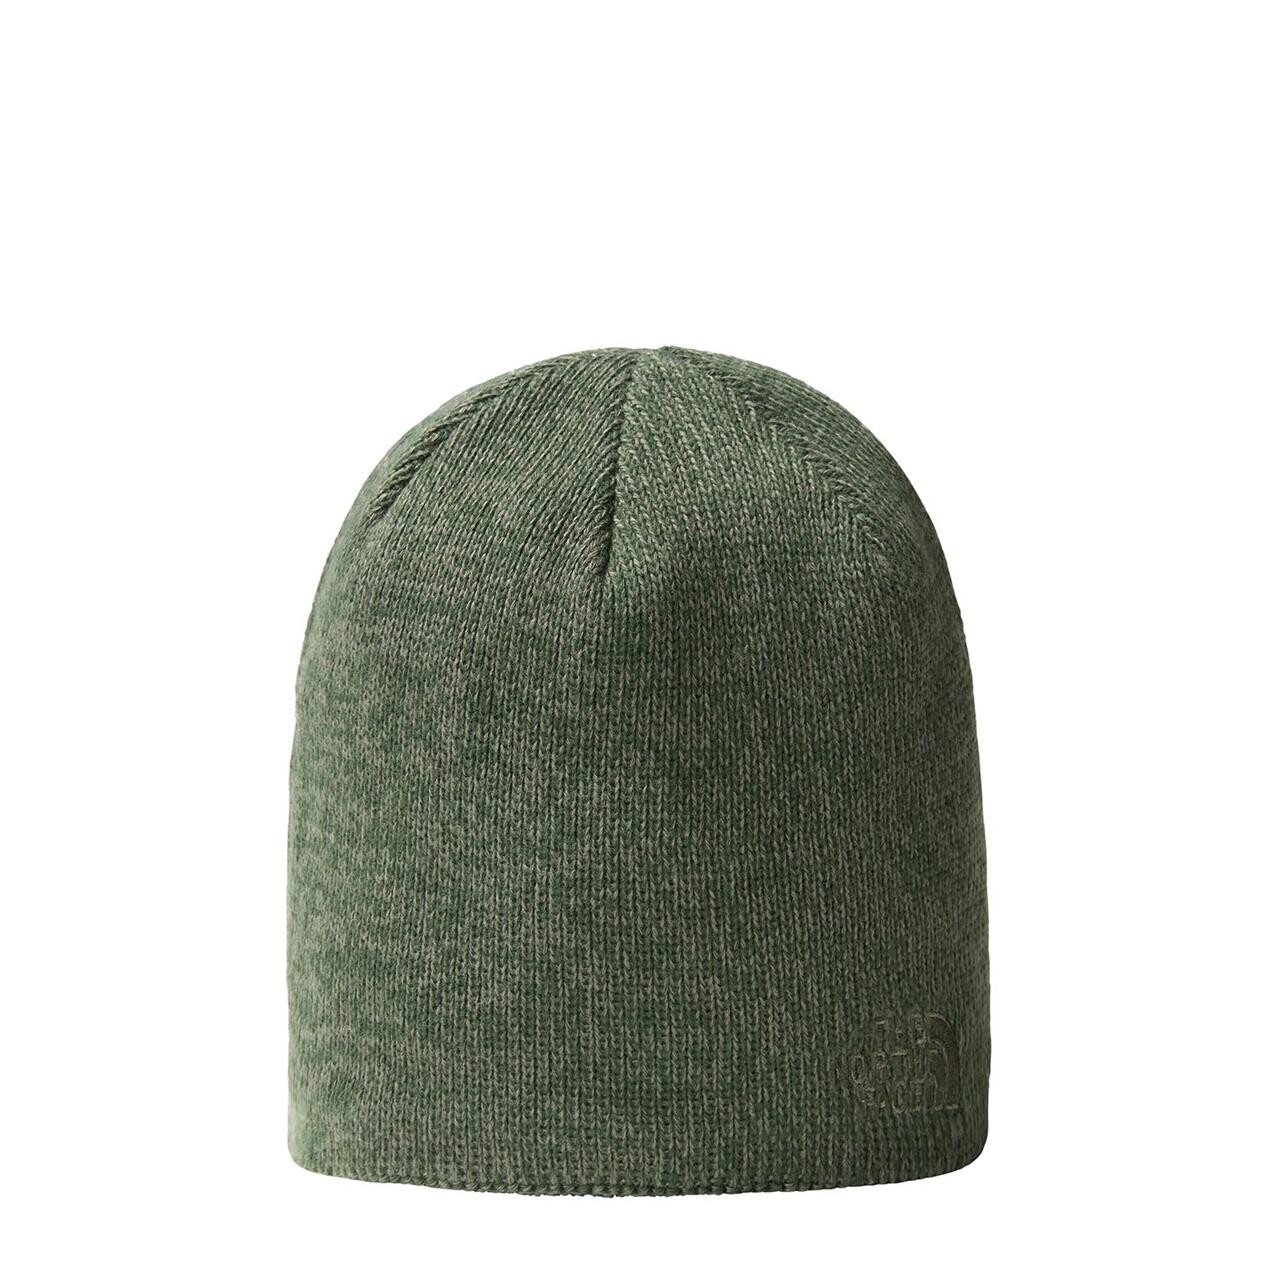 6: The North Face Bones Recycled Beanie (Grøn (PINE NEEDLE HEATHER) One size)